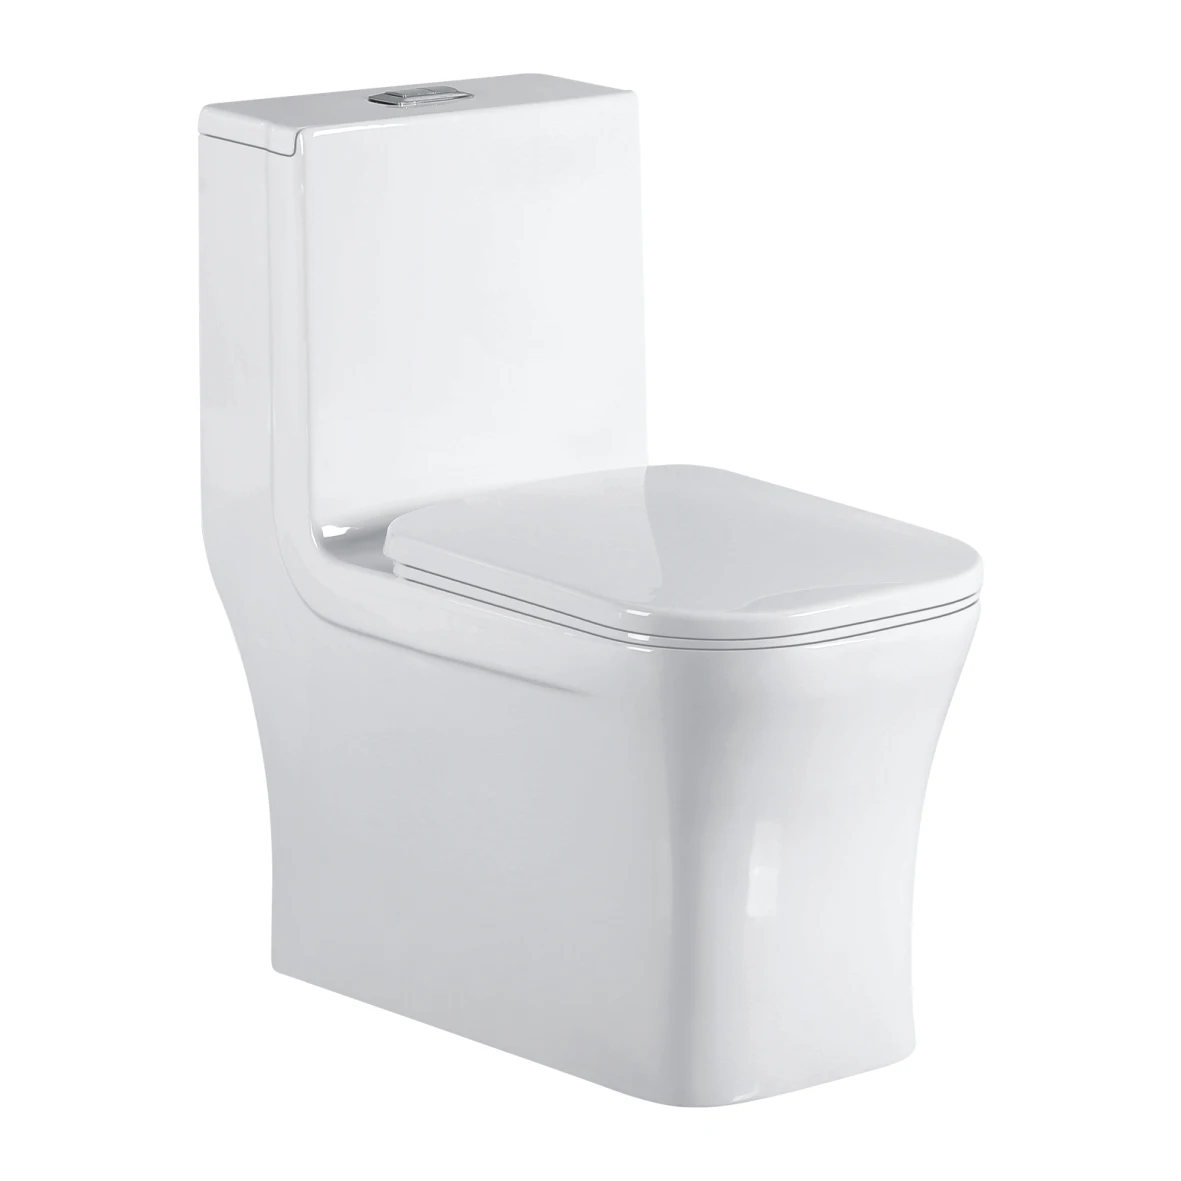 China Made Professional Dual Flush Siphonic One Piece Toilet Design Modern Toilet Factory